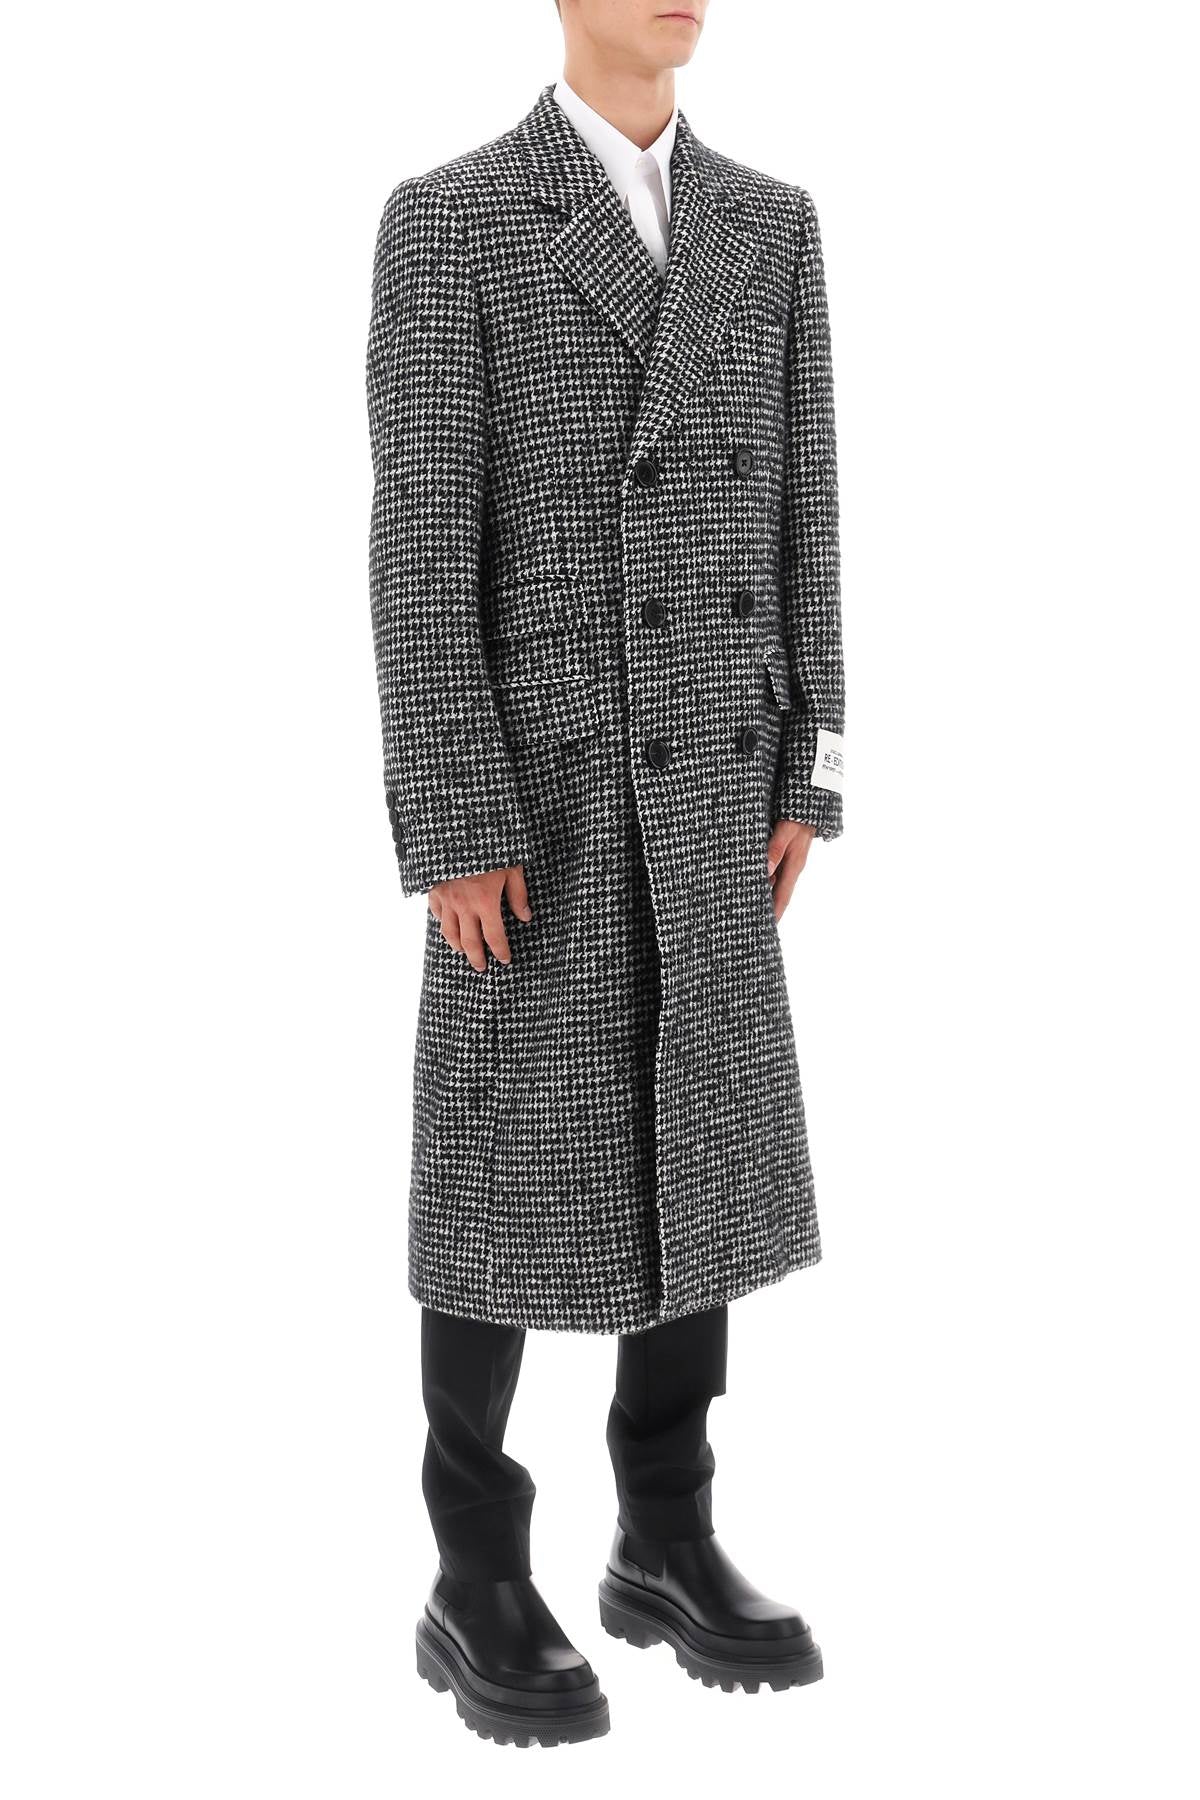 Dolce & gabbana re-edition coat in houndstooth wool-1